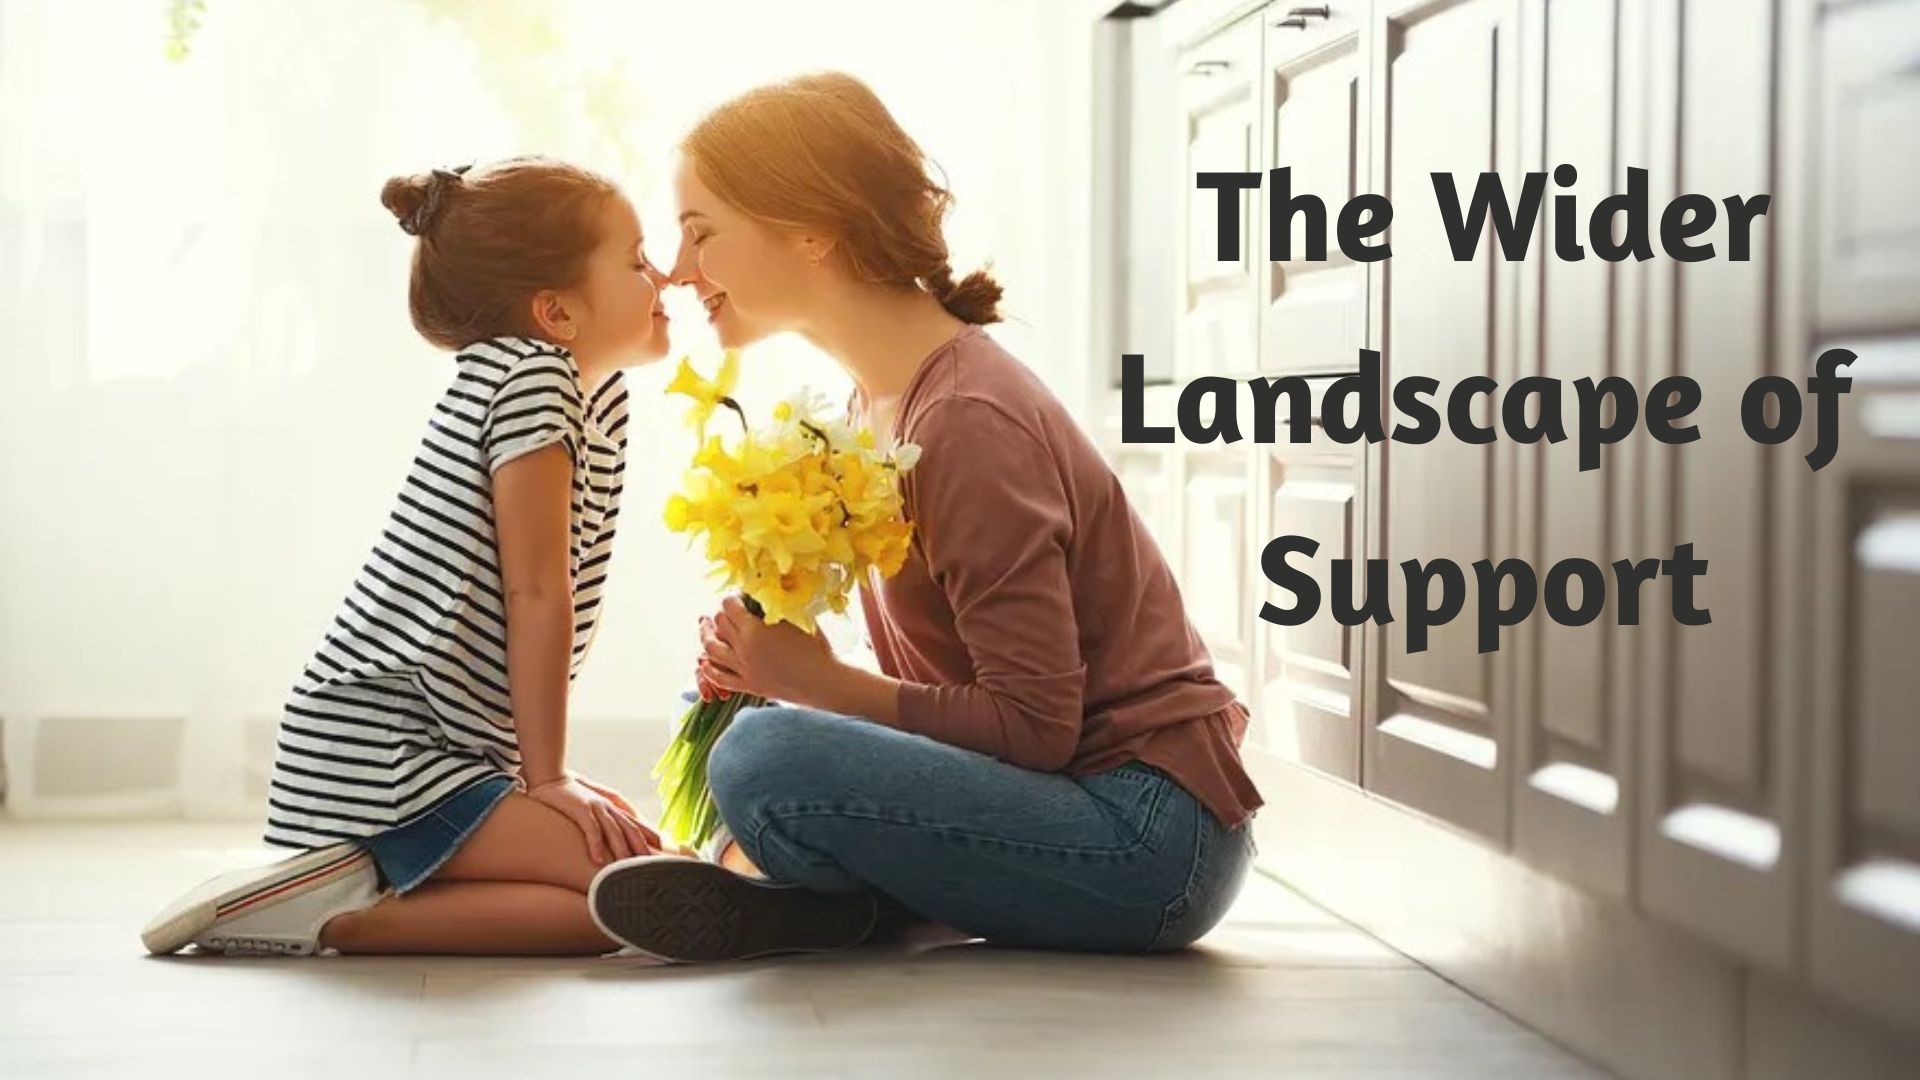 The Wider Landscape of Support